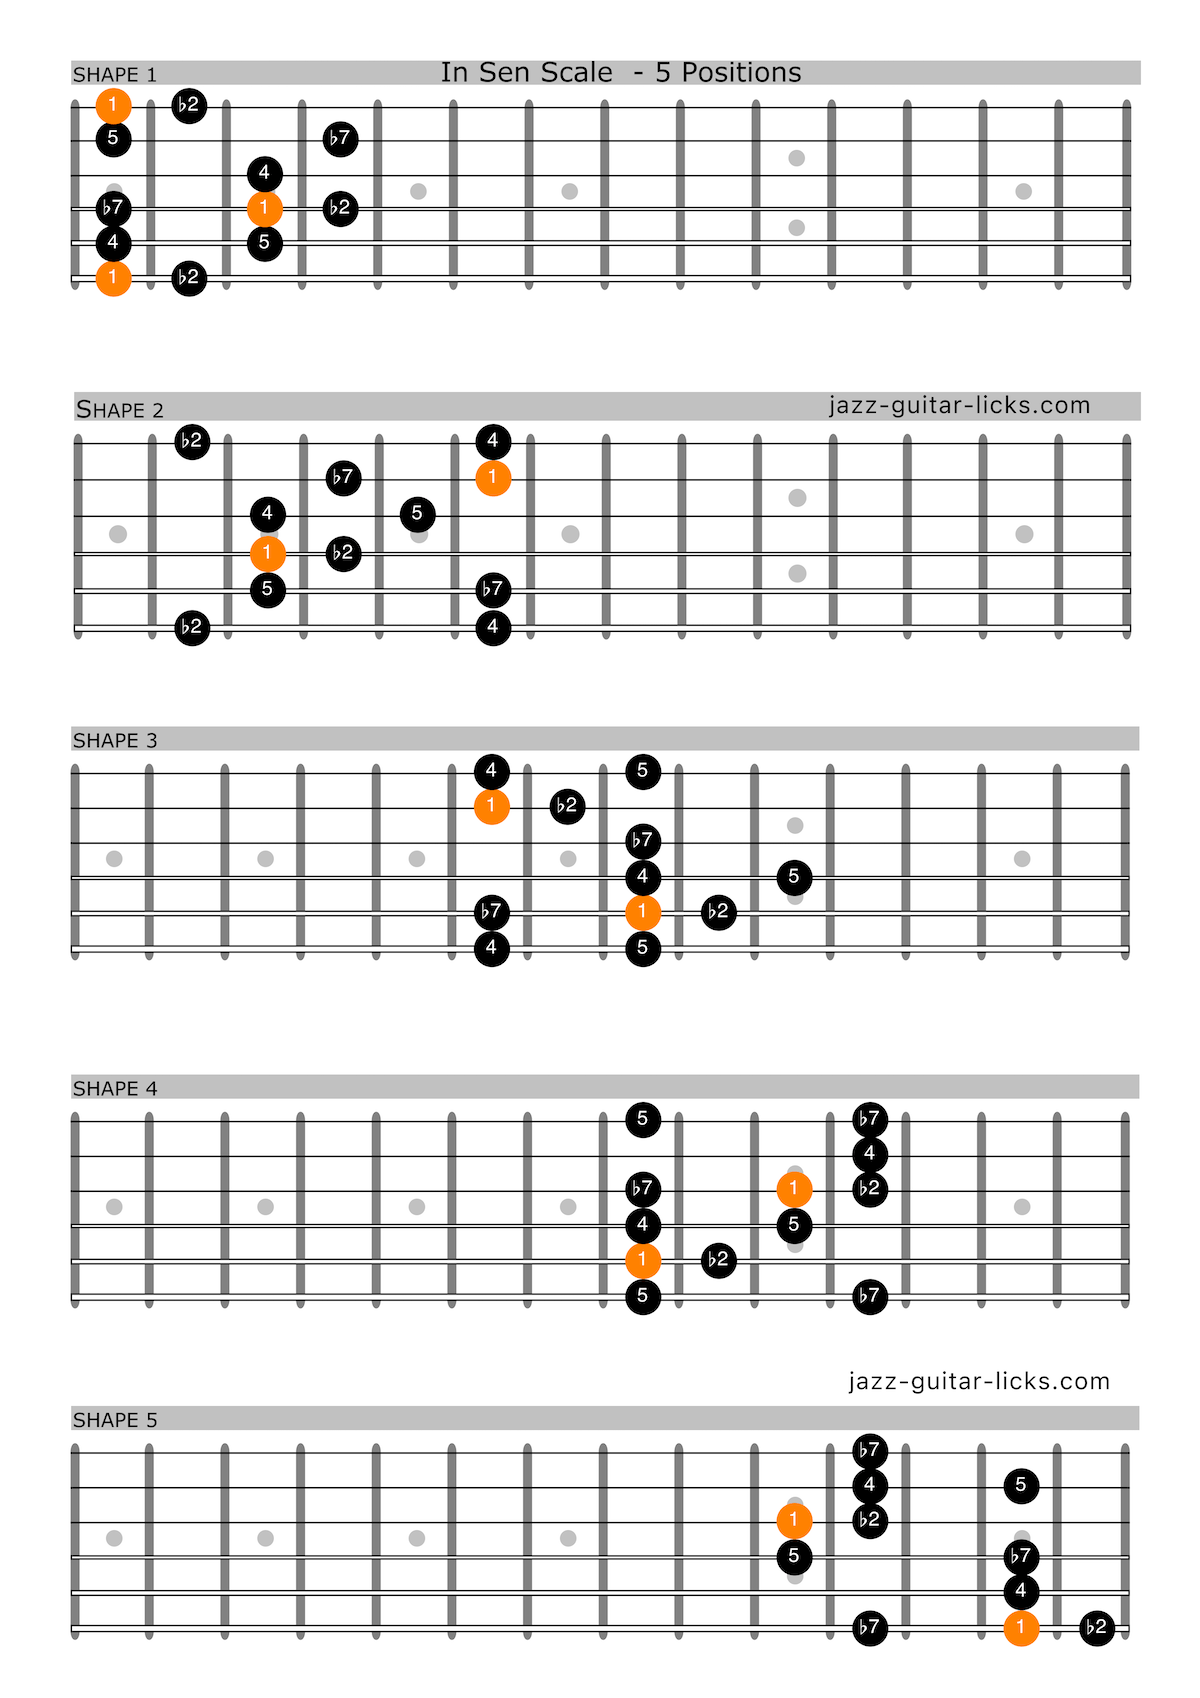 In sen scale guitar shapes